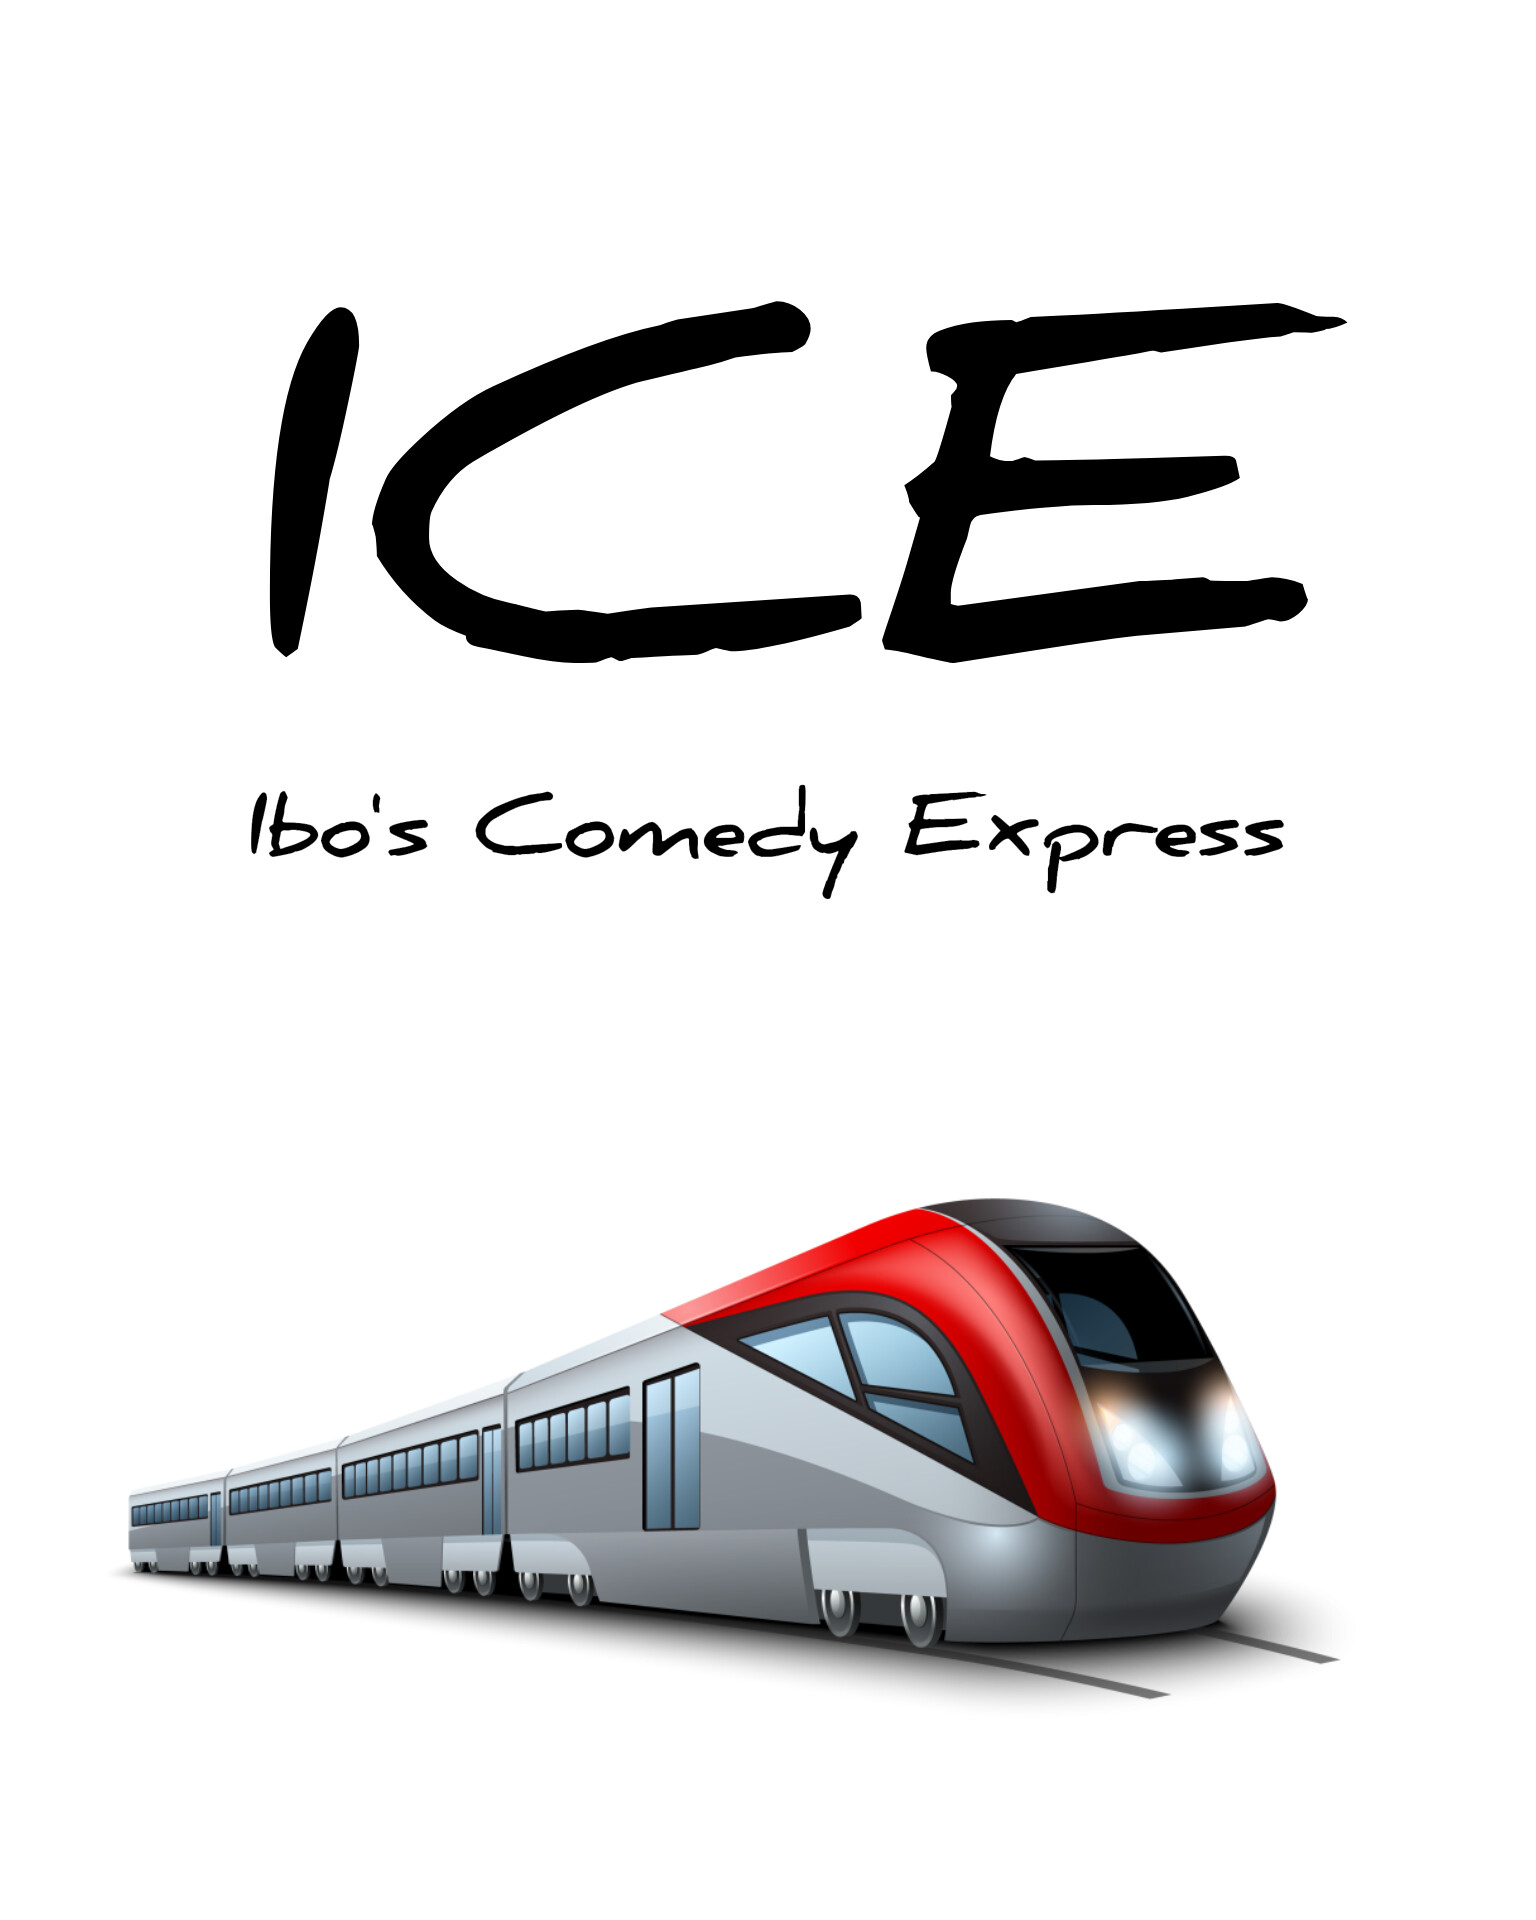 ICE - Ibo's Comedy Express